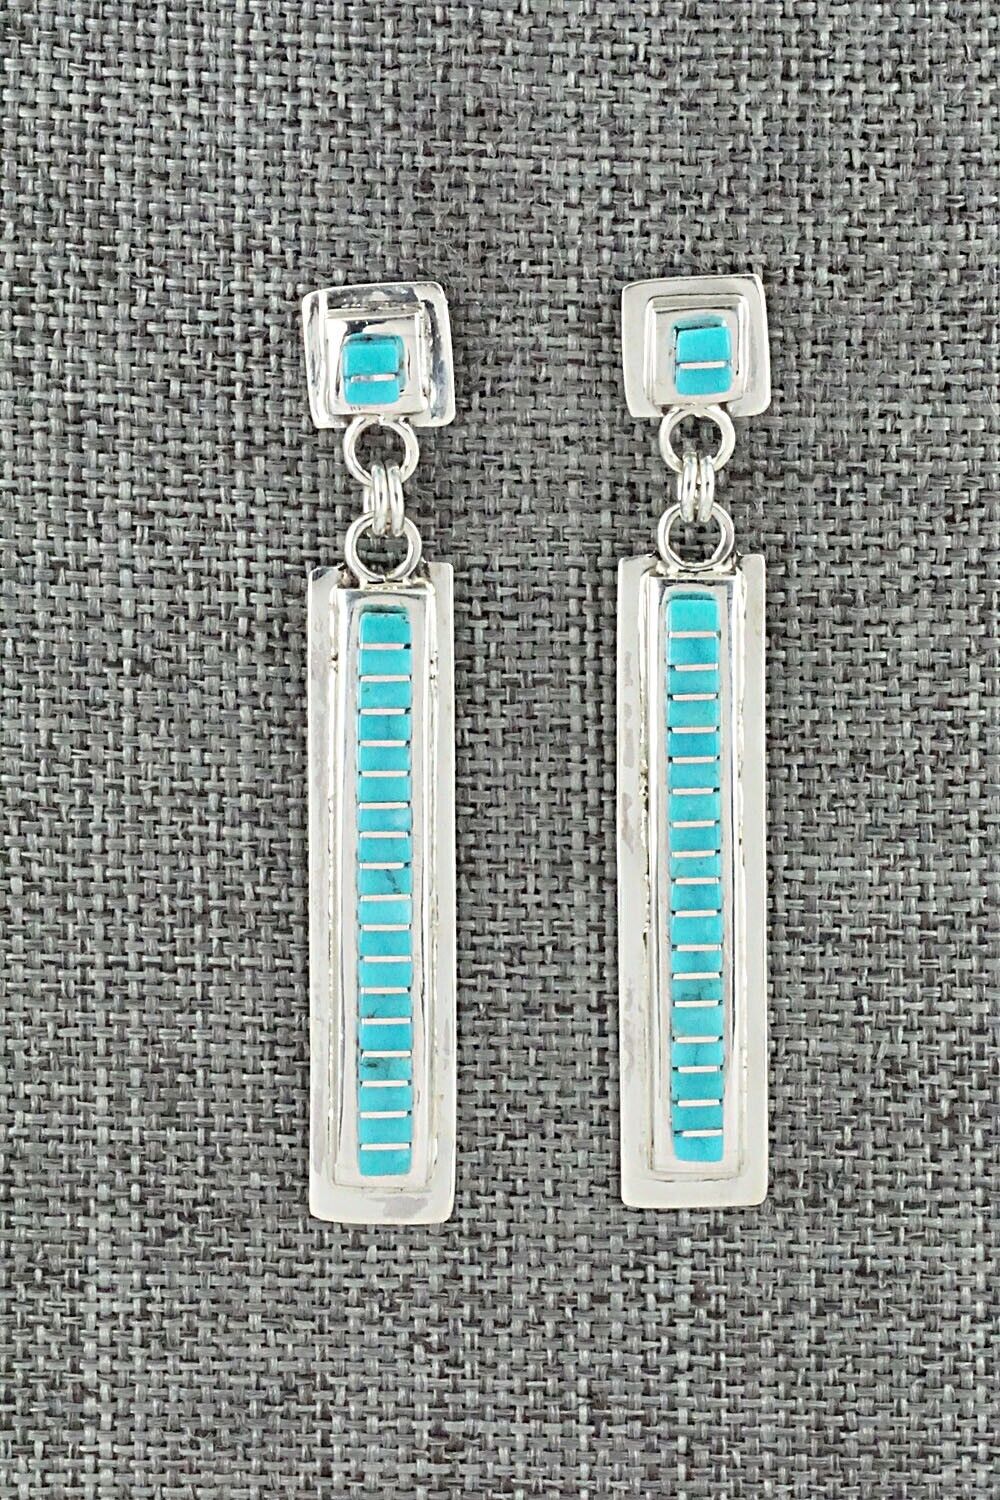 Turquoise & Sterling Silver Inlay Earrings - Janelle Shebola